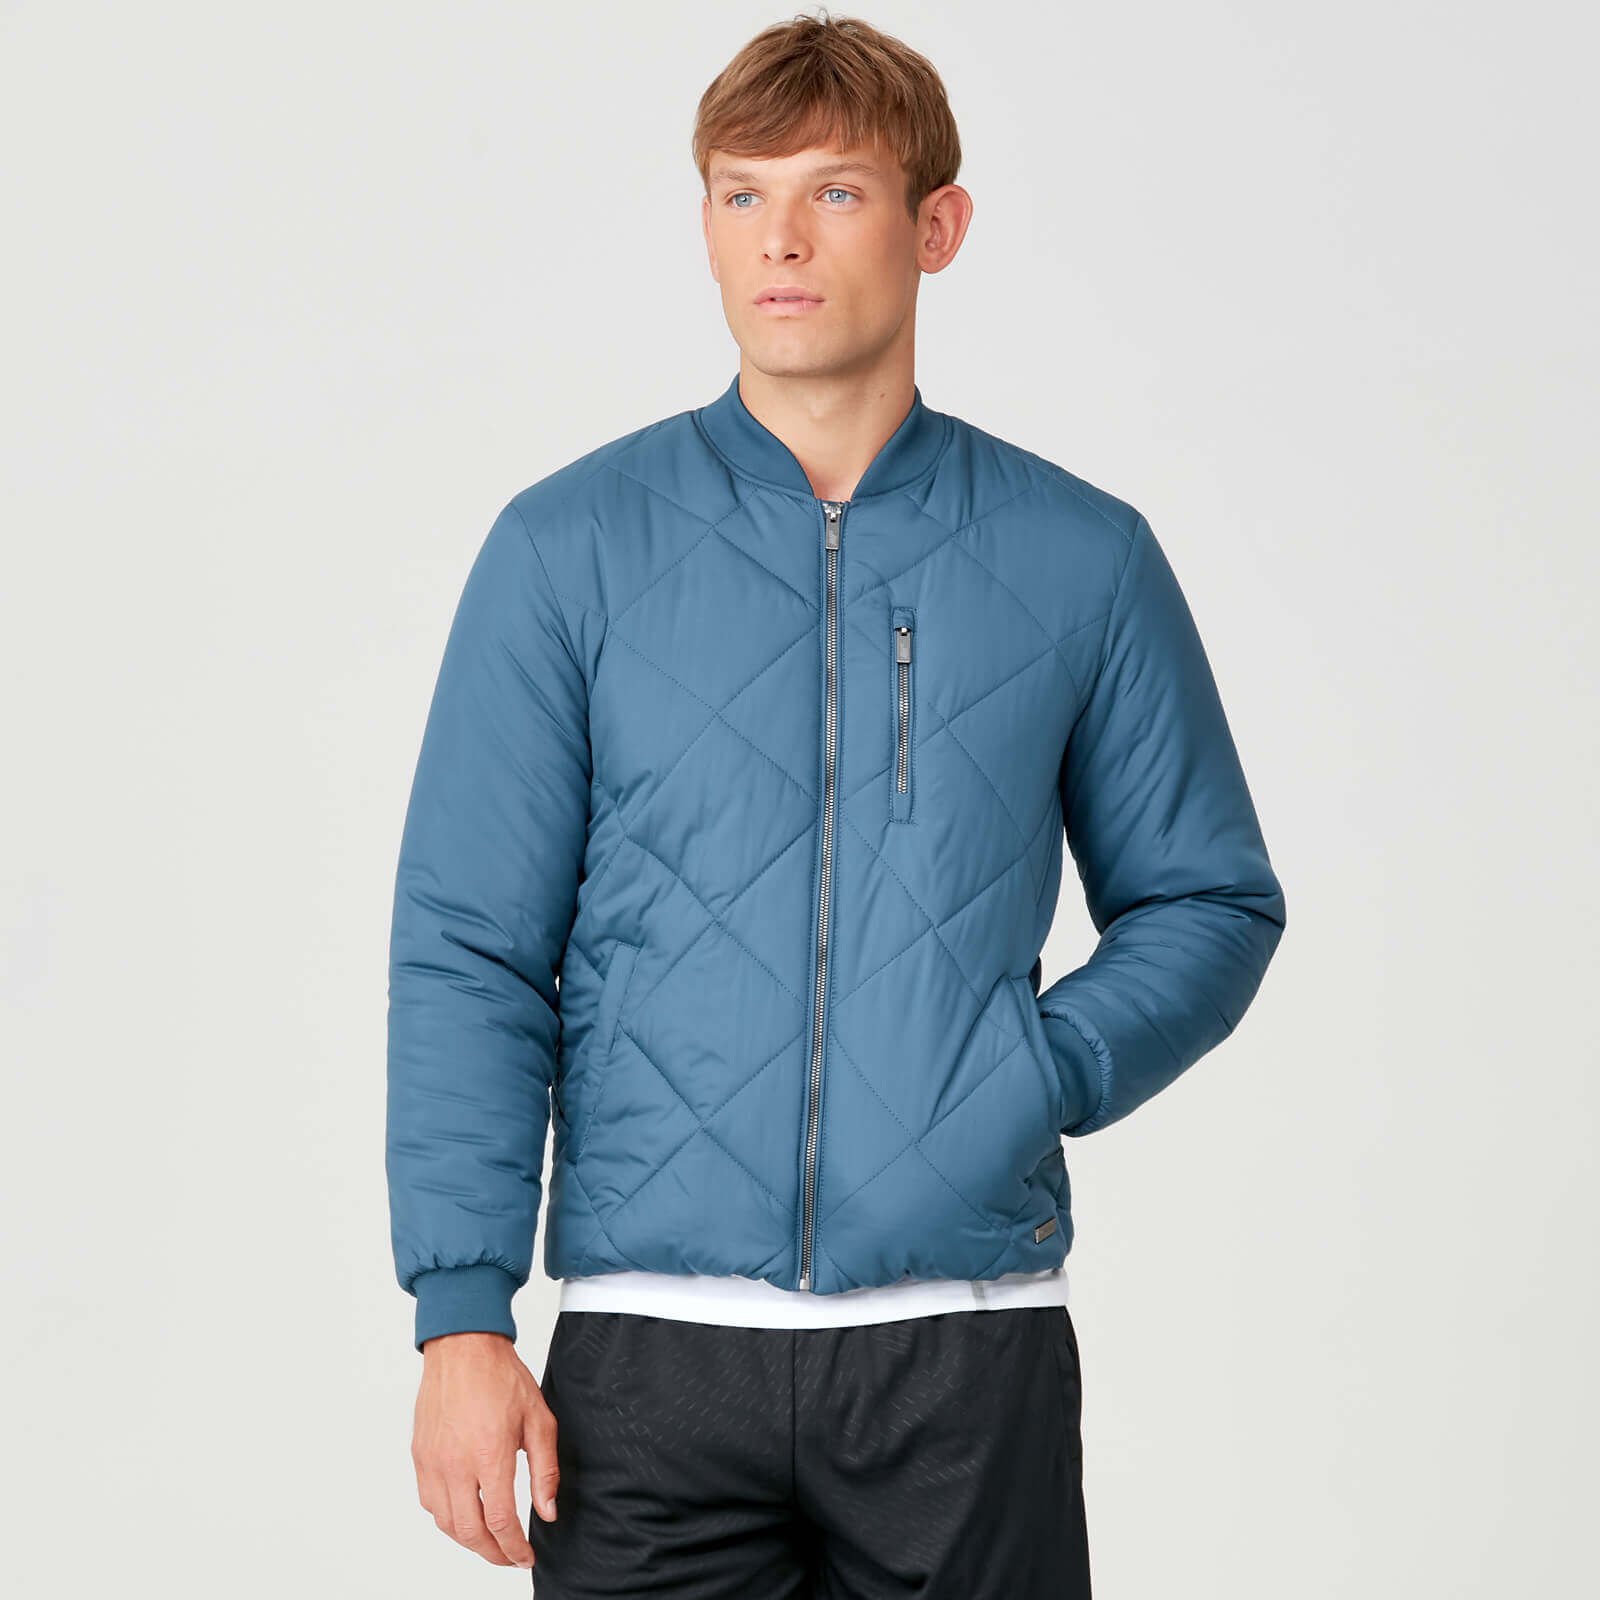 Pro-Tech Quilted bomber jakna - Petrolej plava